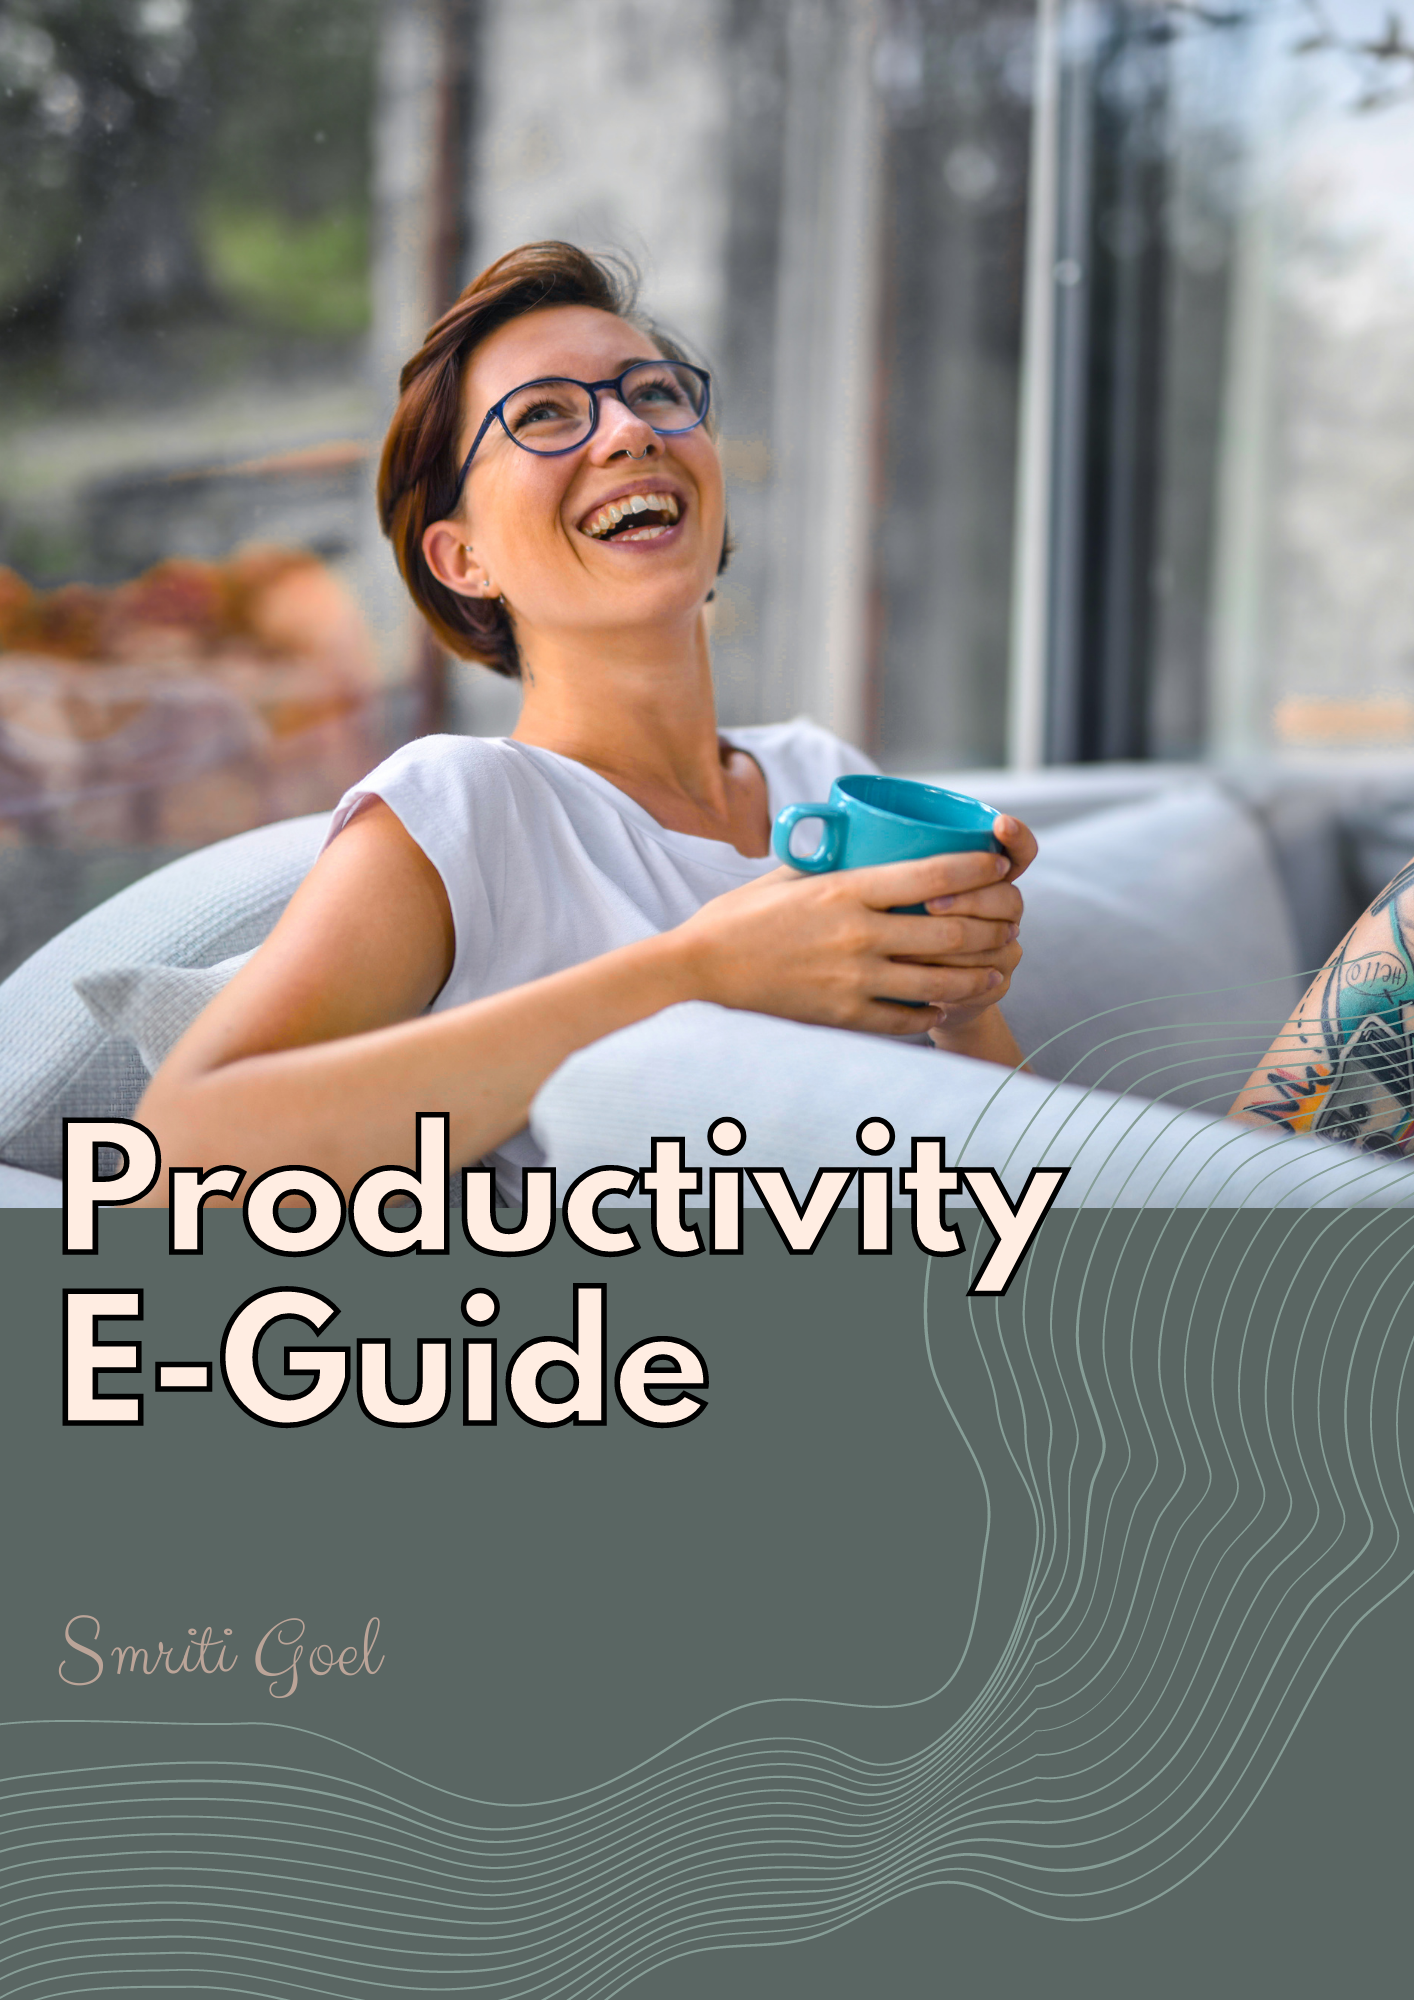 Productivity Guide - Start your day well! (1)